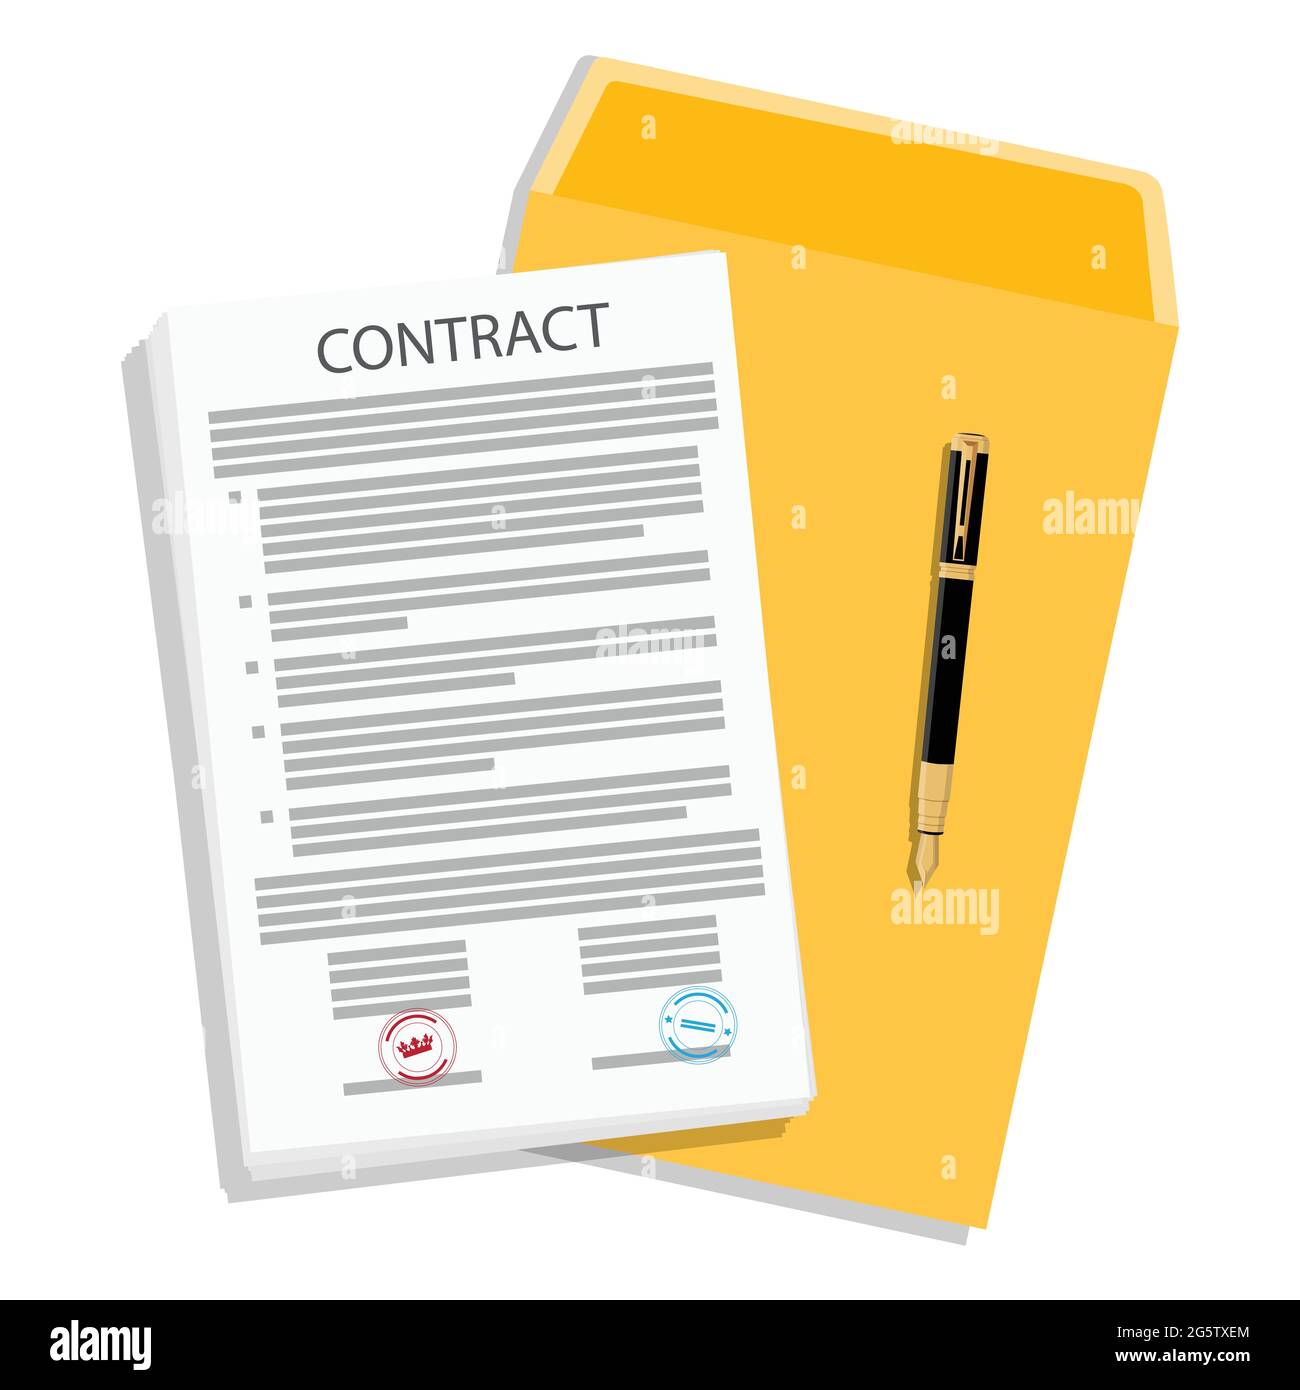 Contract agreement, folder and pen. Partnership signing document concept. Vector illustration Stock Vector